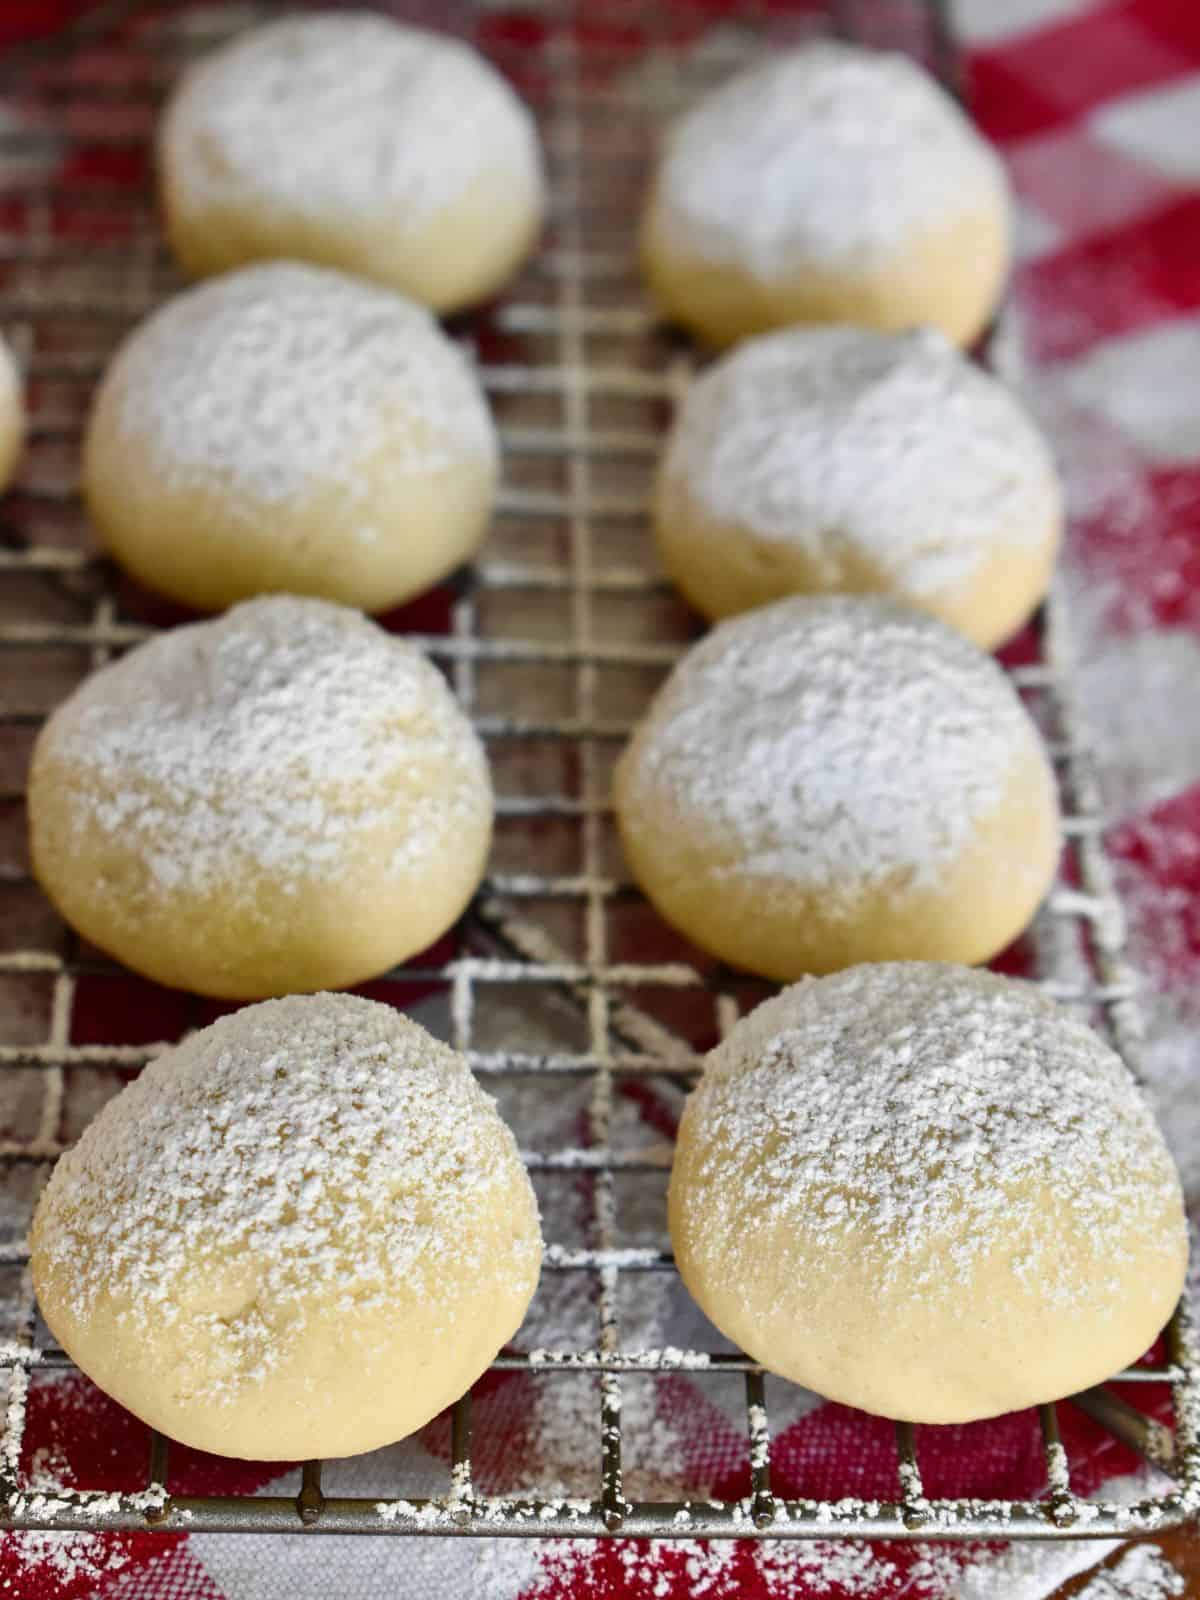 Italian wedding cookies on a wire cooling rack with powdered sugar dusted on top of them.